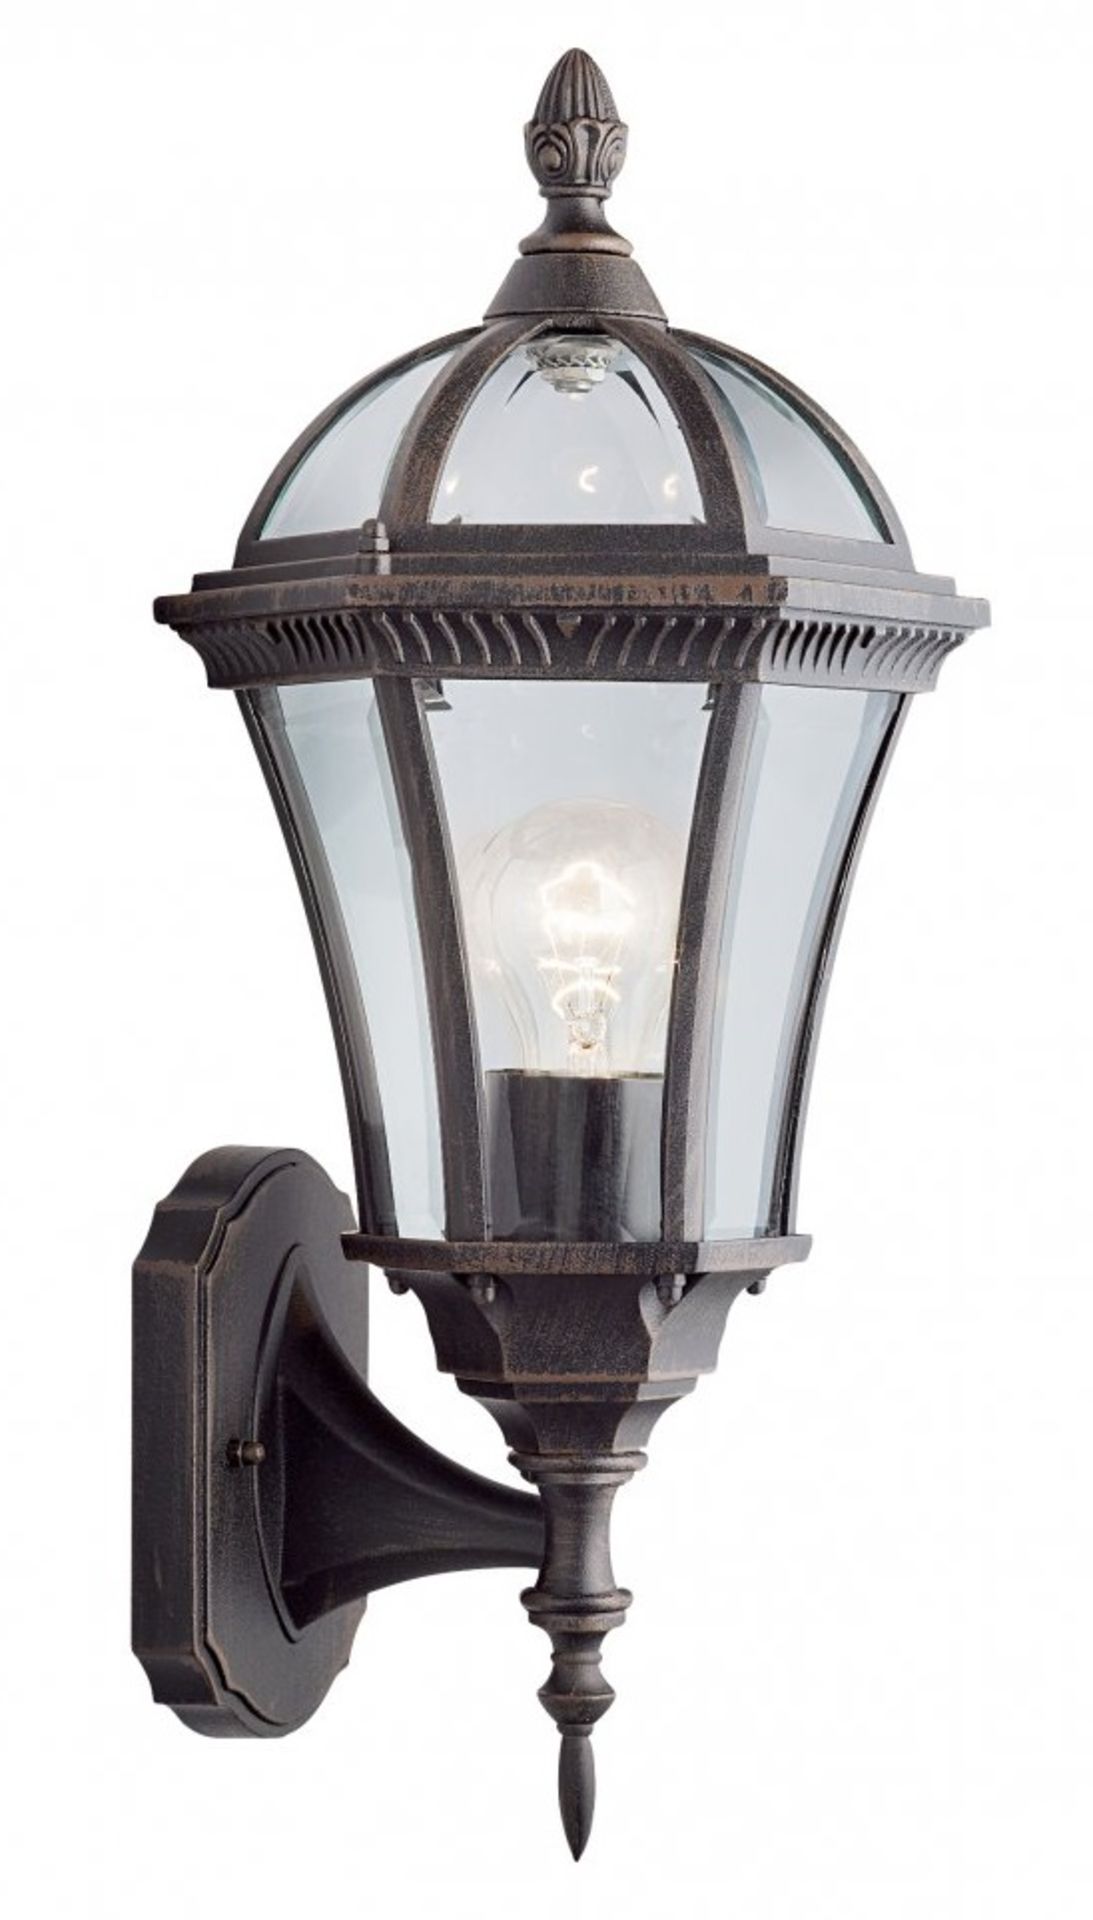 5 x Searchlight Capri Outdoor Wall Lights - Rustic Brown Cast Aluminium IP44 Product Code 1565 - New - Image 3 of 3